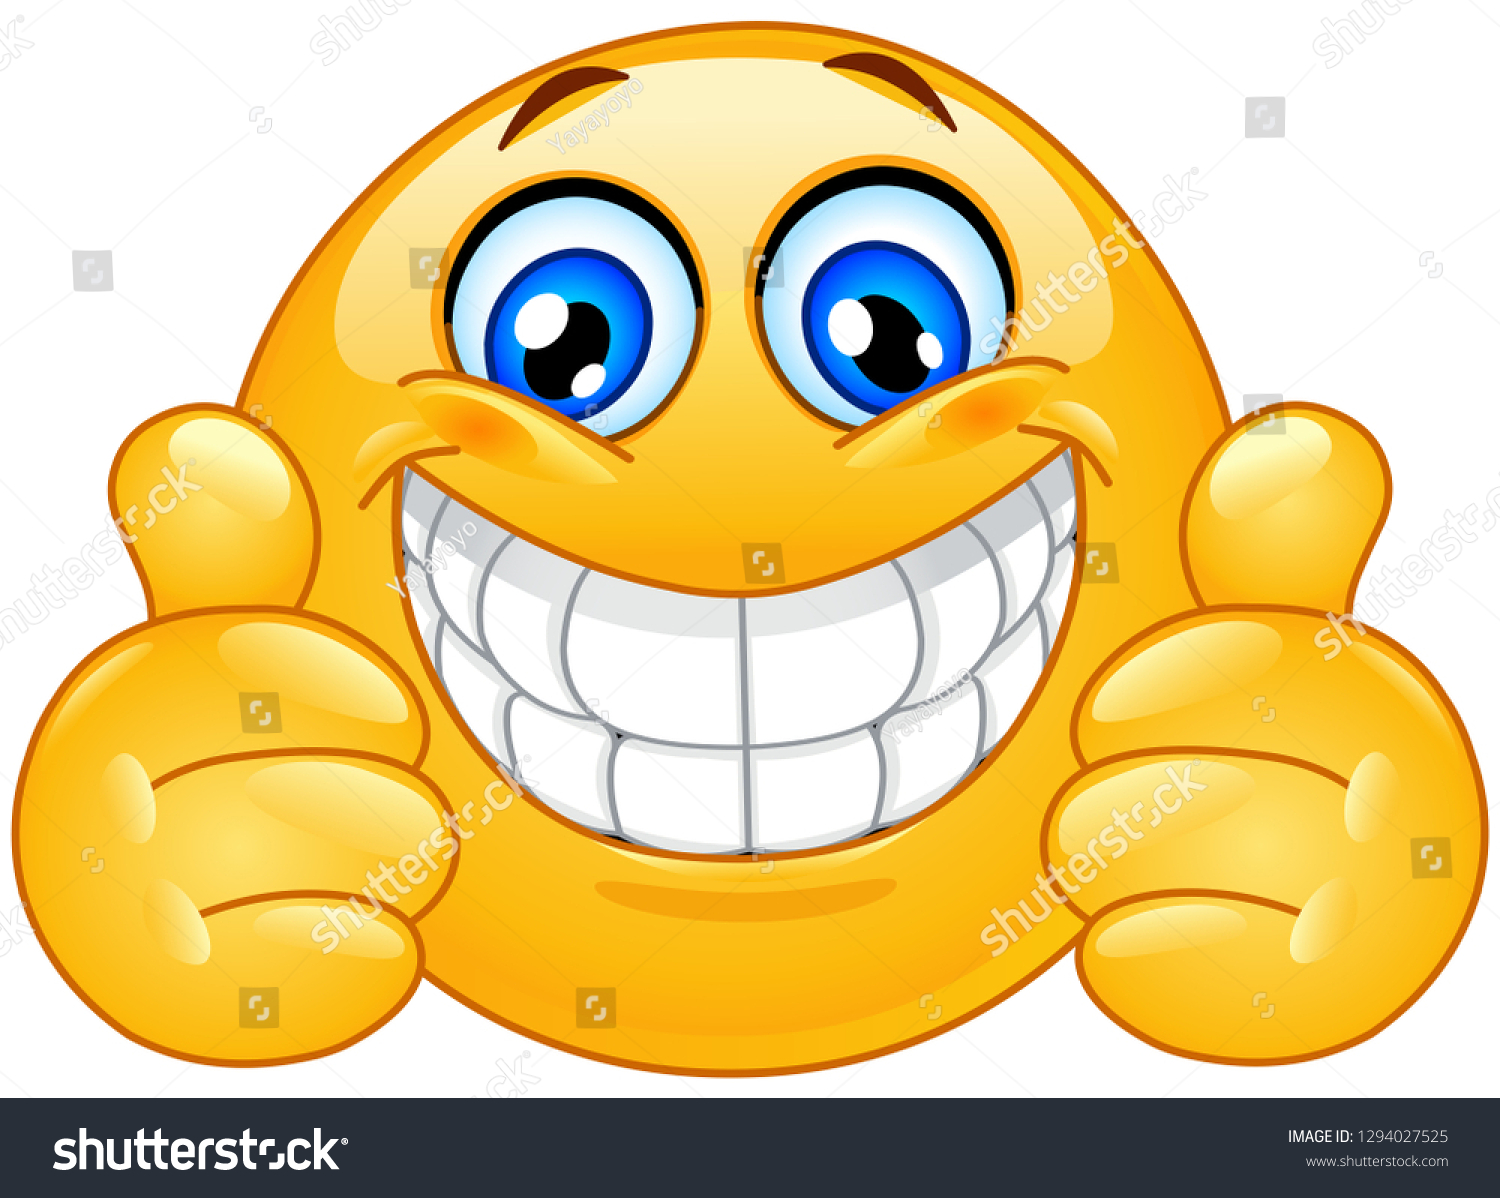 Big smile emoticon with thumbs up